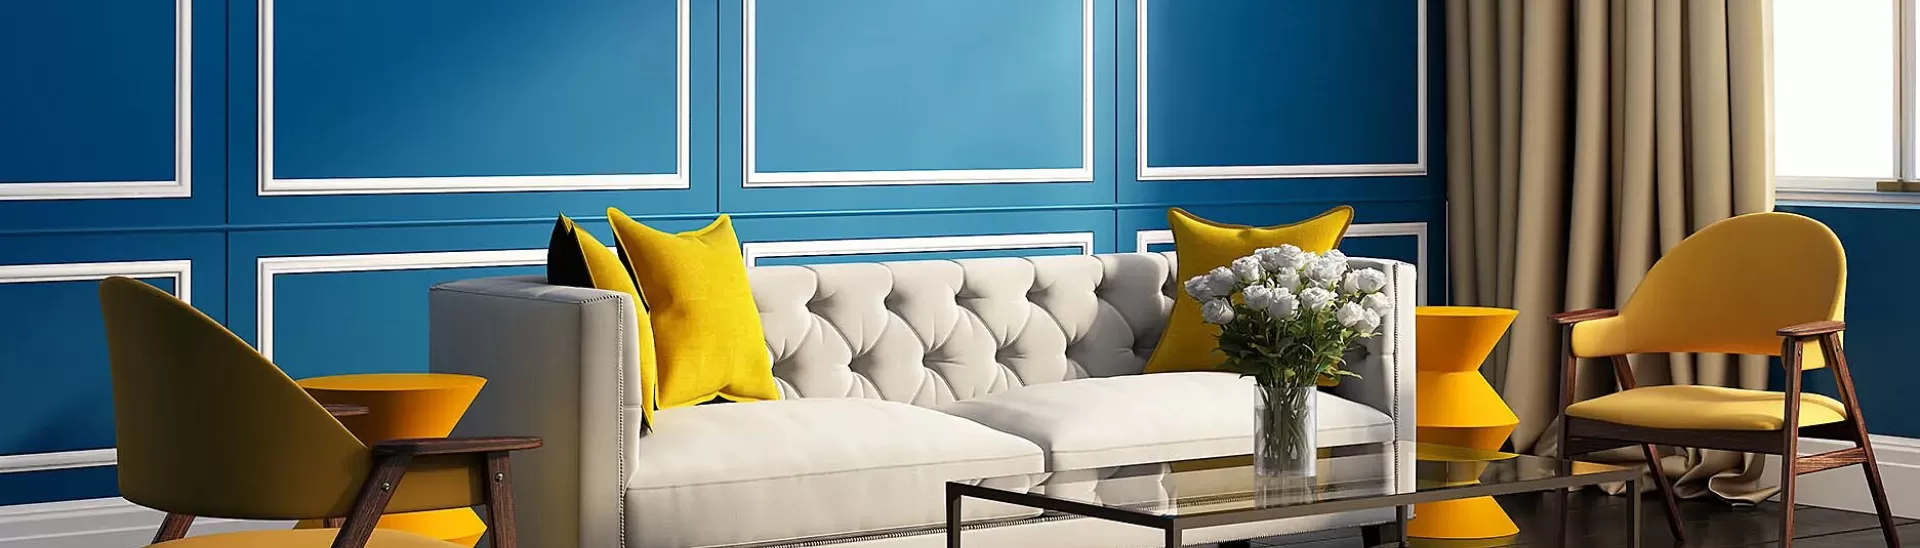 14 Amazing Colour Combinations with Blue - Find What Colours Match ...